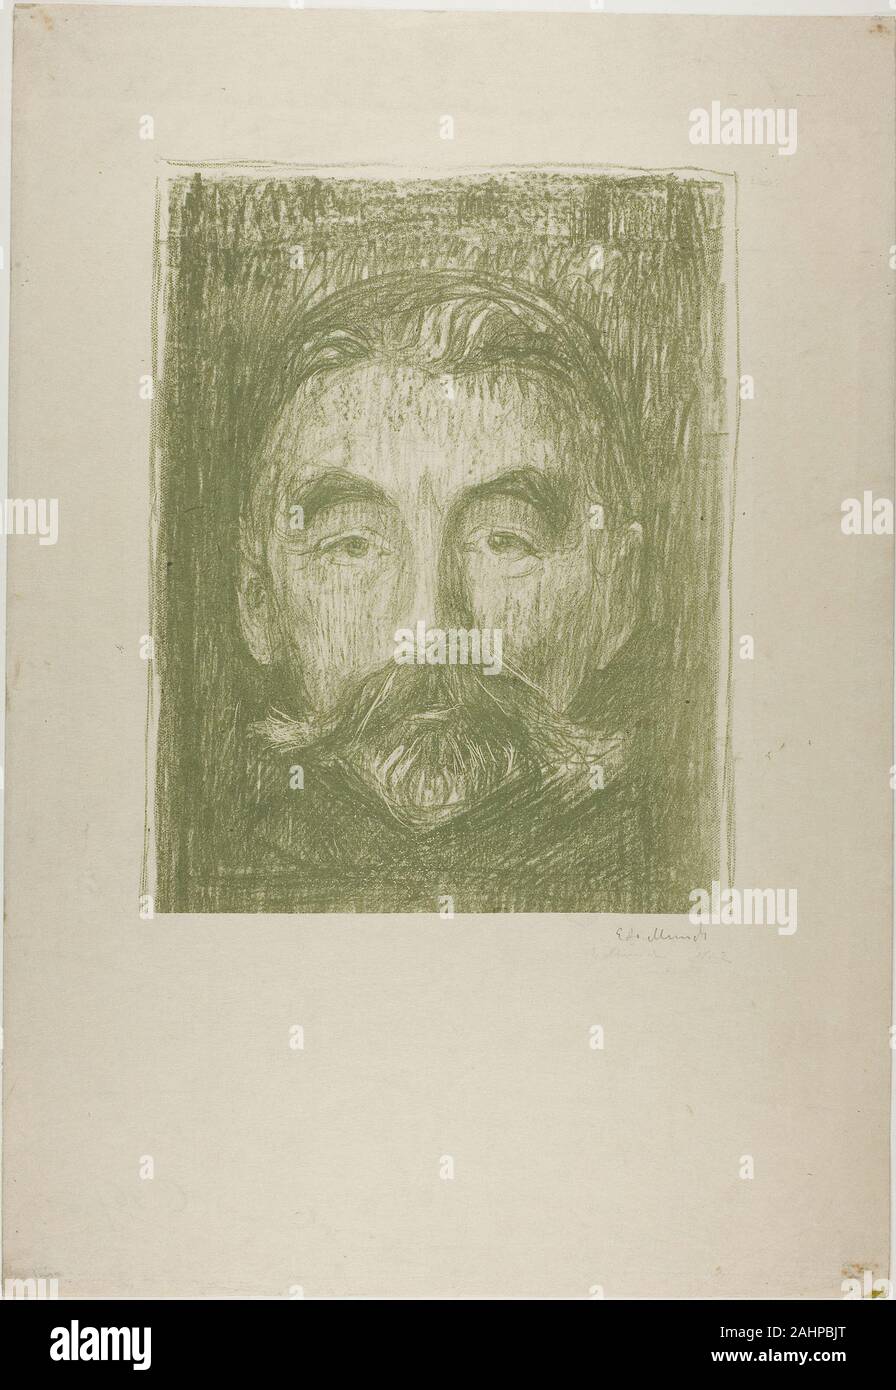 Edvard Munch. Stéphane Mallarmé. 1897. Norway. Transfer lithograph with  crayon and scraping in green on cream Japanese paper Stéphane Mallarmé is  today considered one of France's most important poets of the second